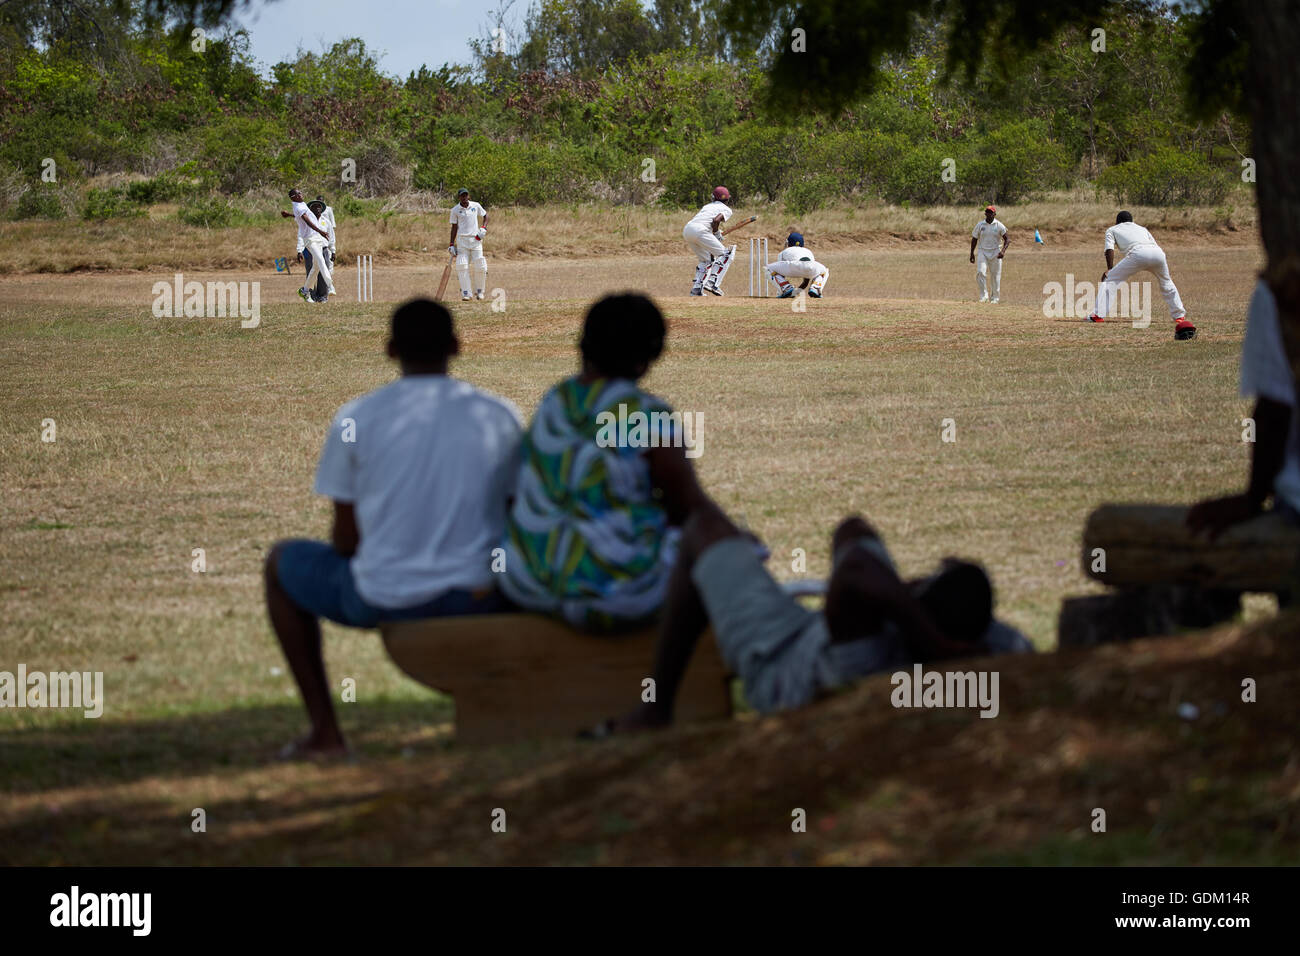 The Lesser Antilles Barbados Parish west indies Barbados houses in the Keith David Boyce Pavillion cricket club match playing fi Stock Photo